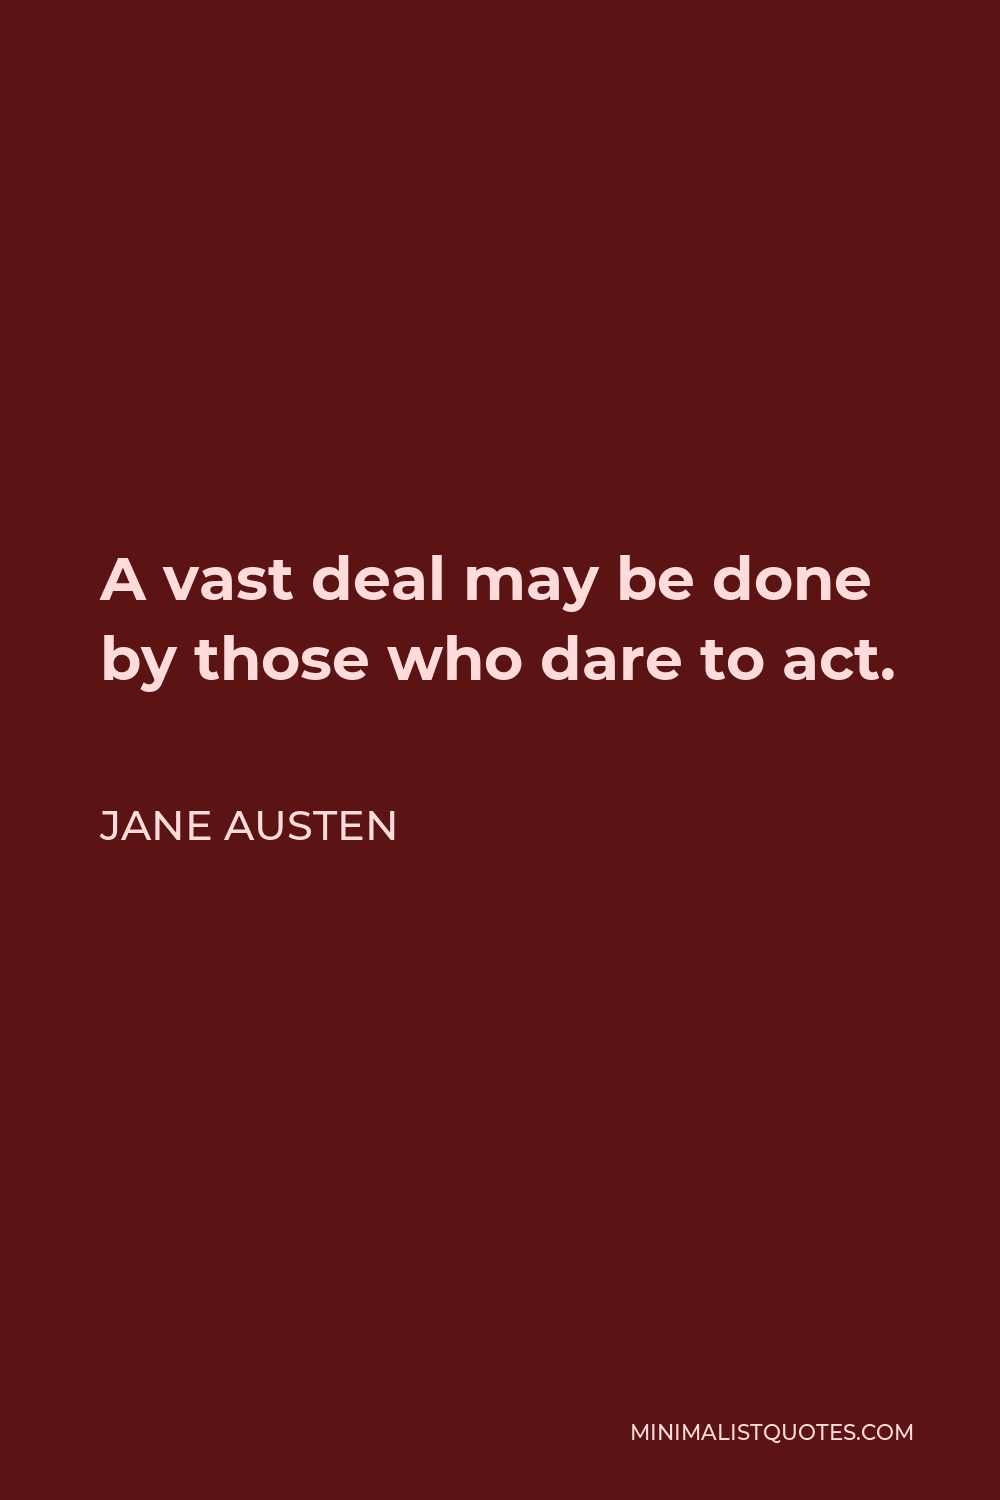 Jane Austen Quote - A vast deal may be done by those who dare to act.